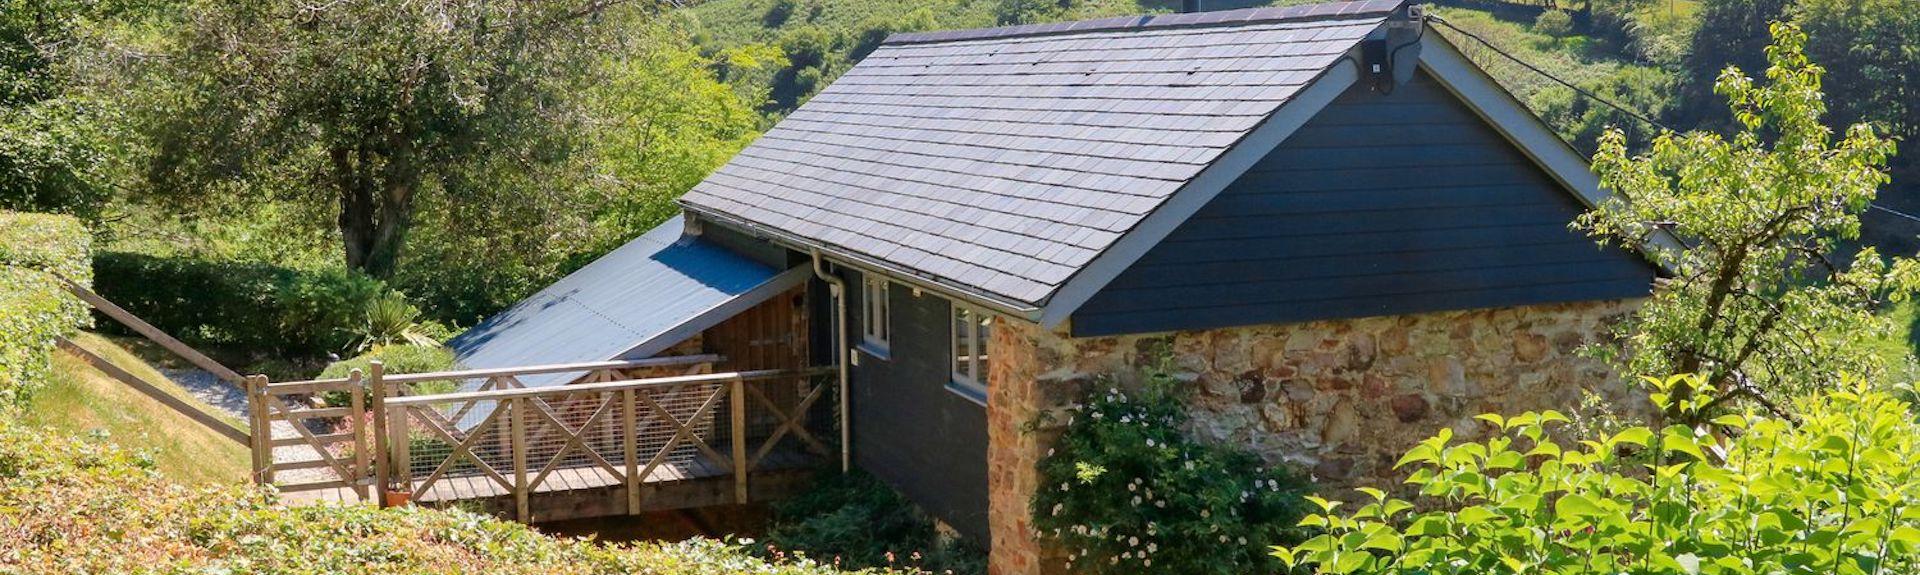 A single storey barn conversion in North Devon surrounded by gardens and tall hedge rows.